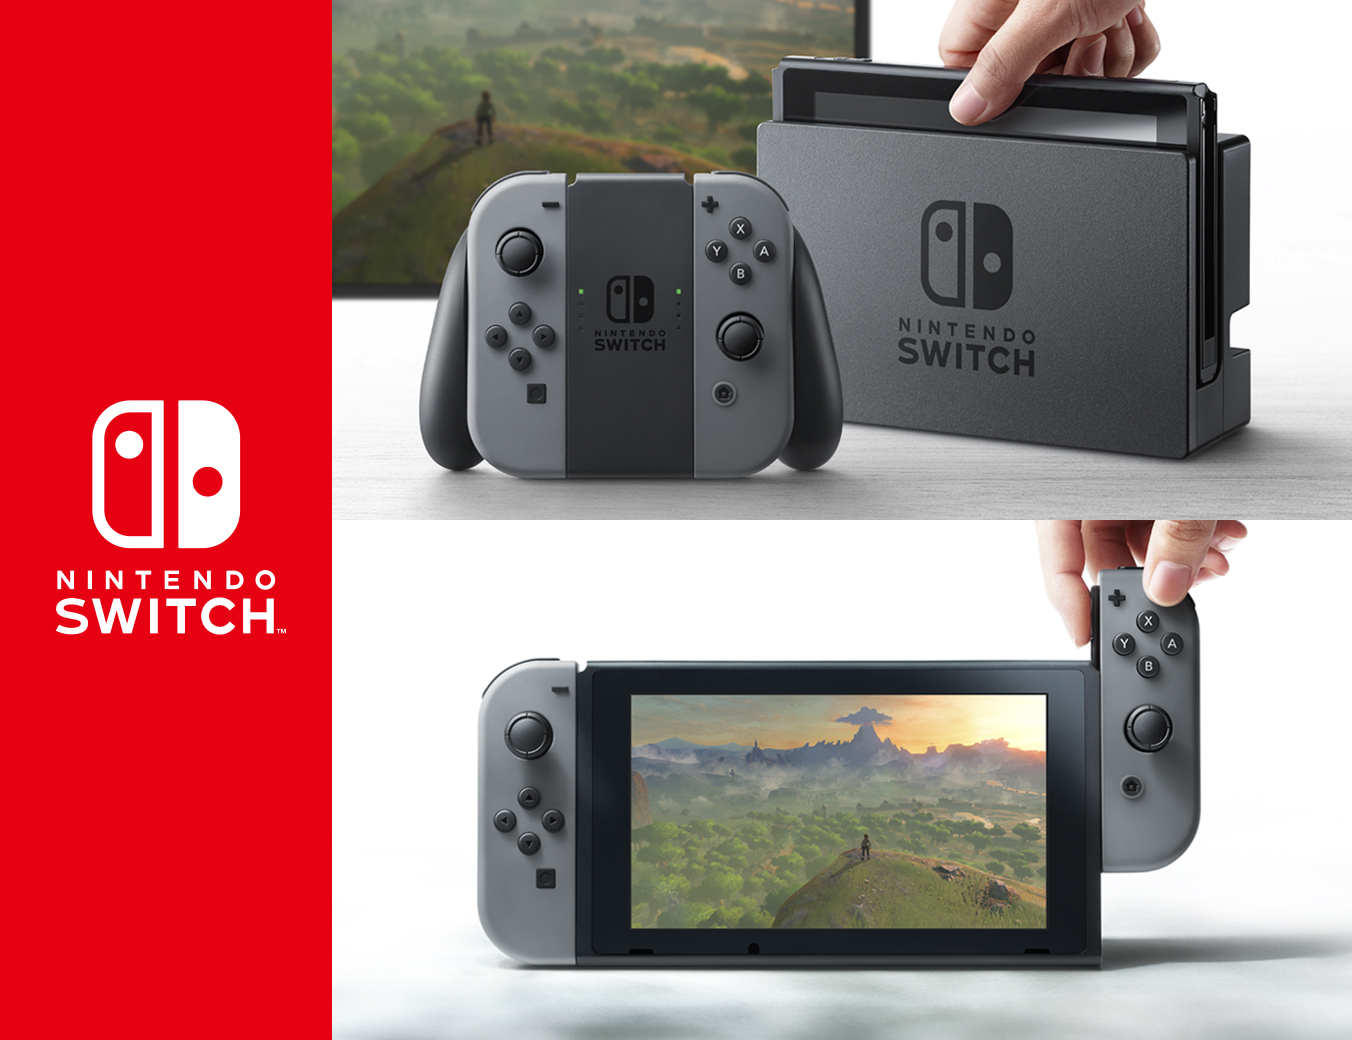 Nintendo Switch pre-launch event in New York City